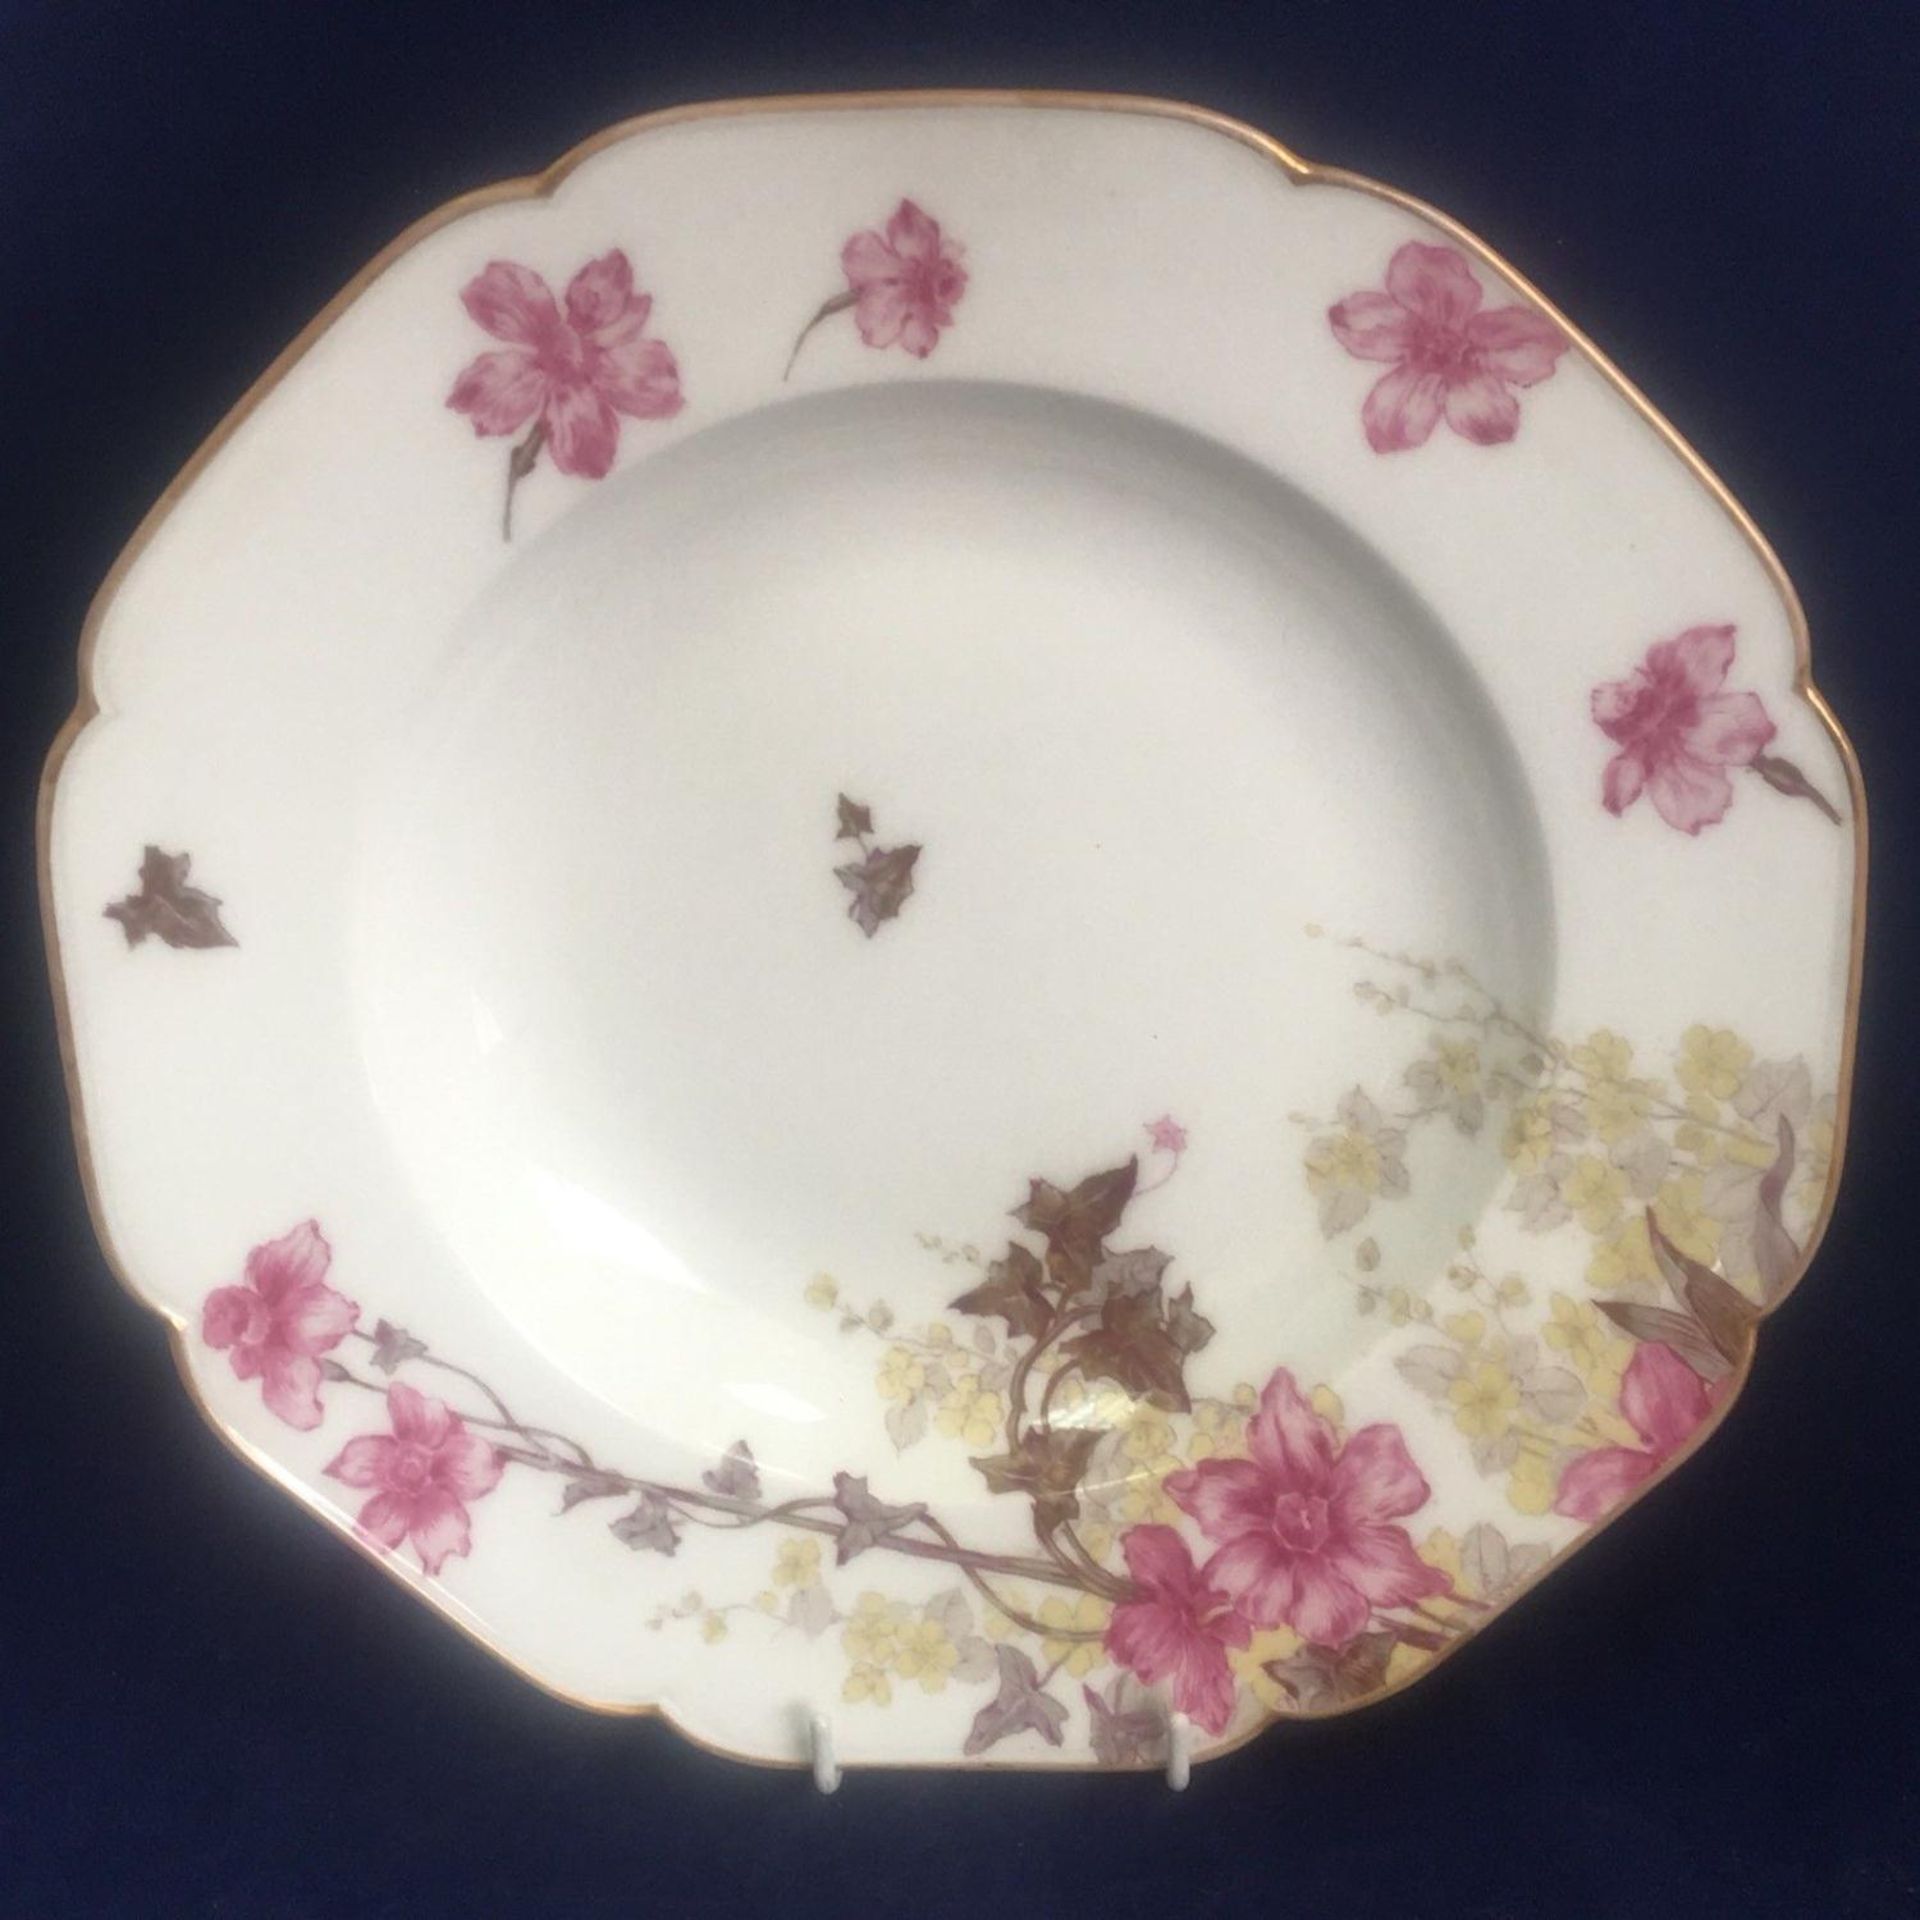 Set of 7 French Porcelain Dishes H & Co Limoges with English London Retailers Mark - Image 3 of 3